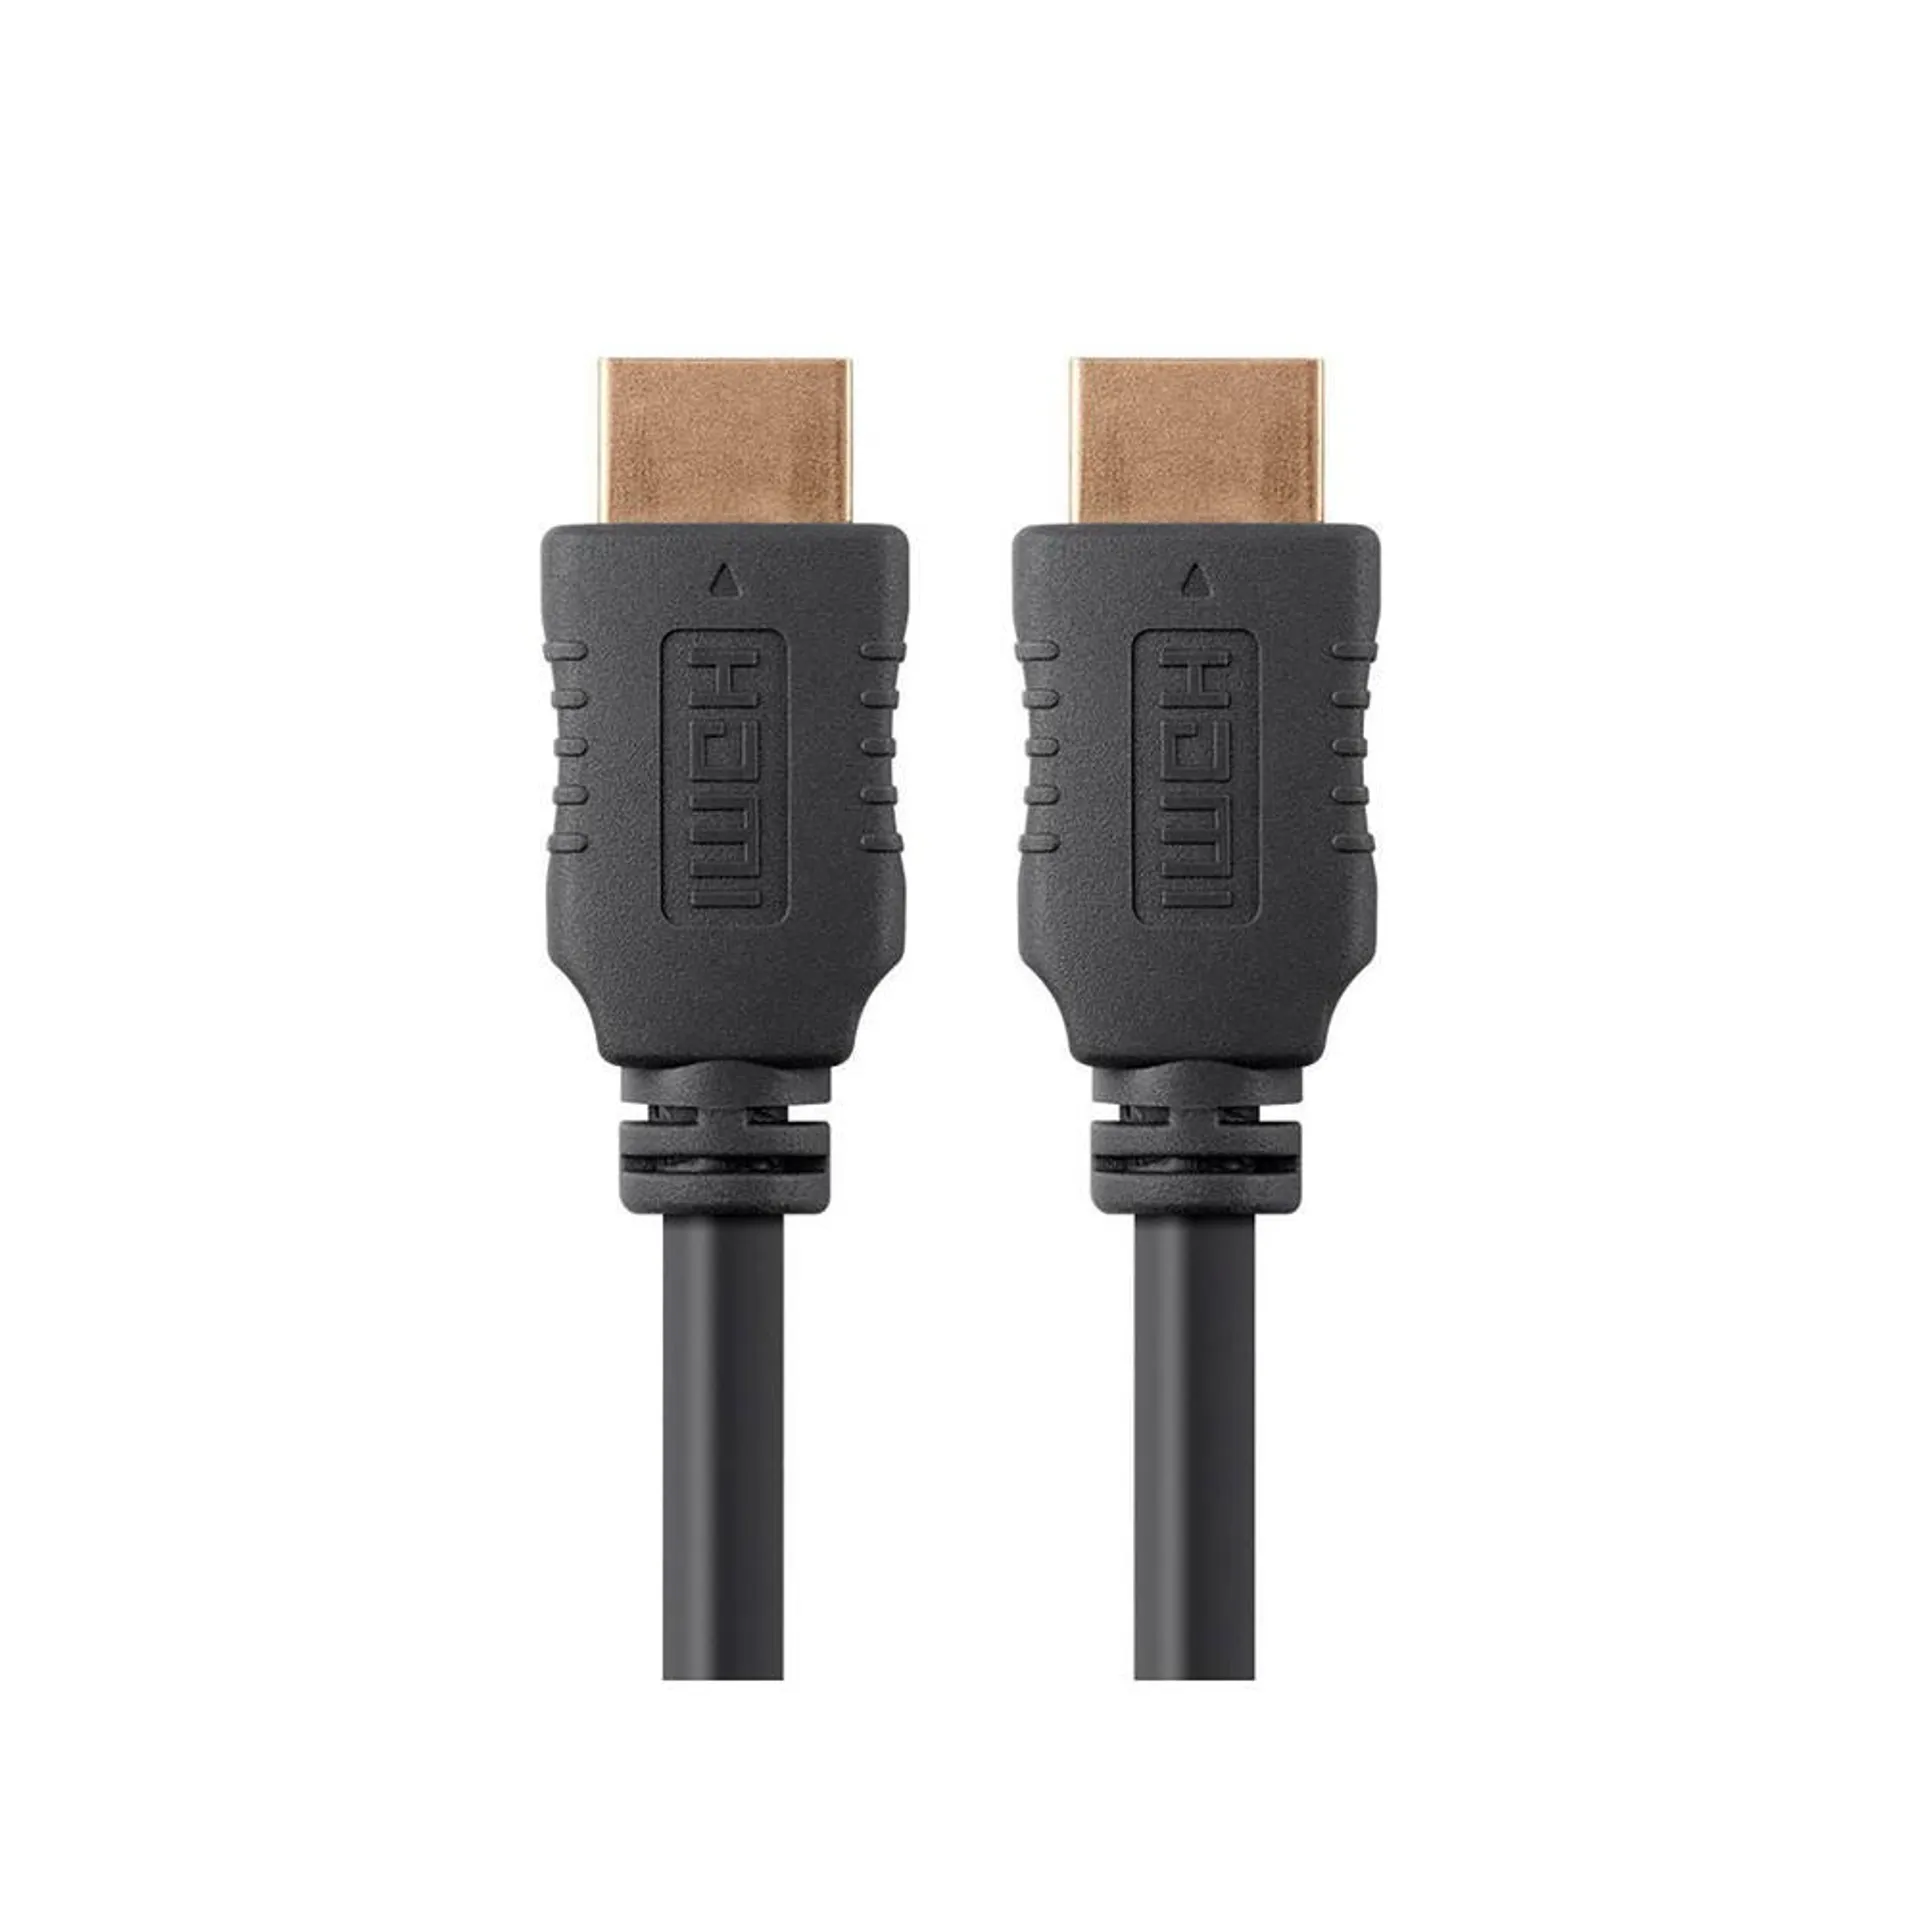 Monoprice Select Series High Speed HDMI Cable - Black